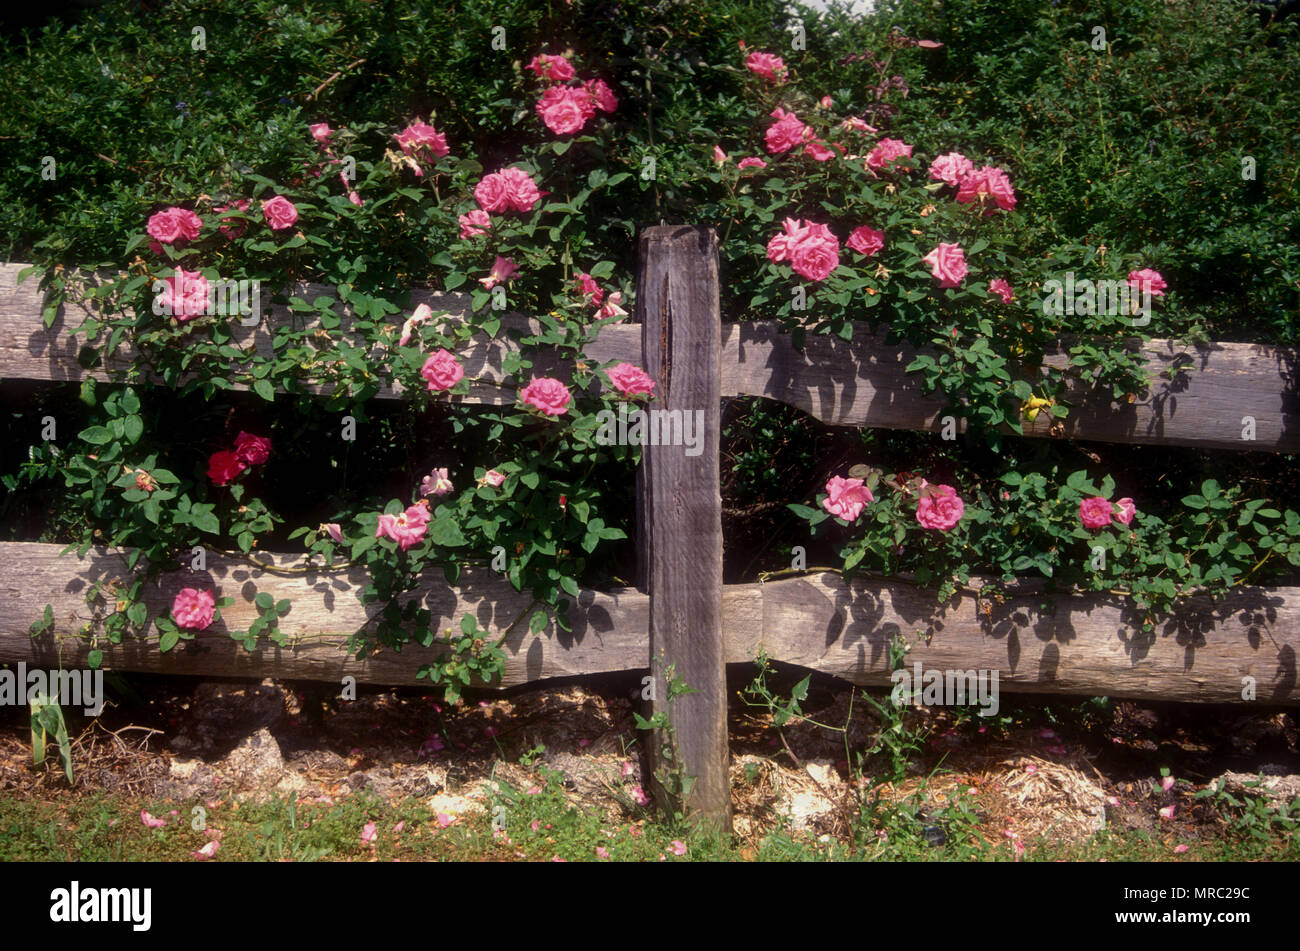 PINK ROSE BUSH CLIMBING OVER OLD WOODEN GARDEN FENCE, NEW SOUTH WALES, AUSTRALIA Stock Photo